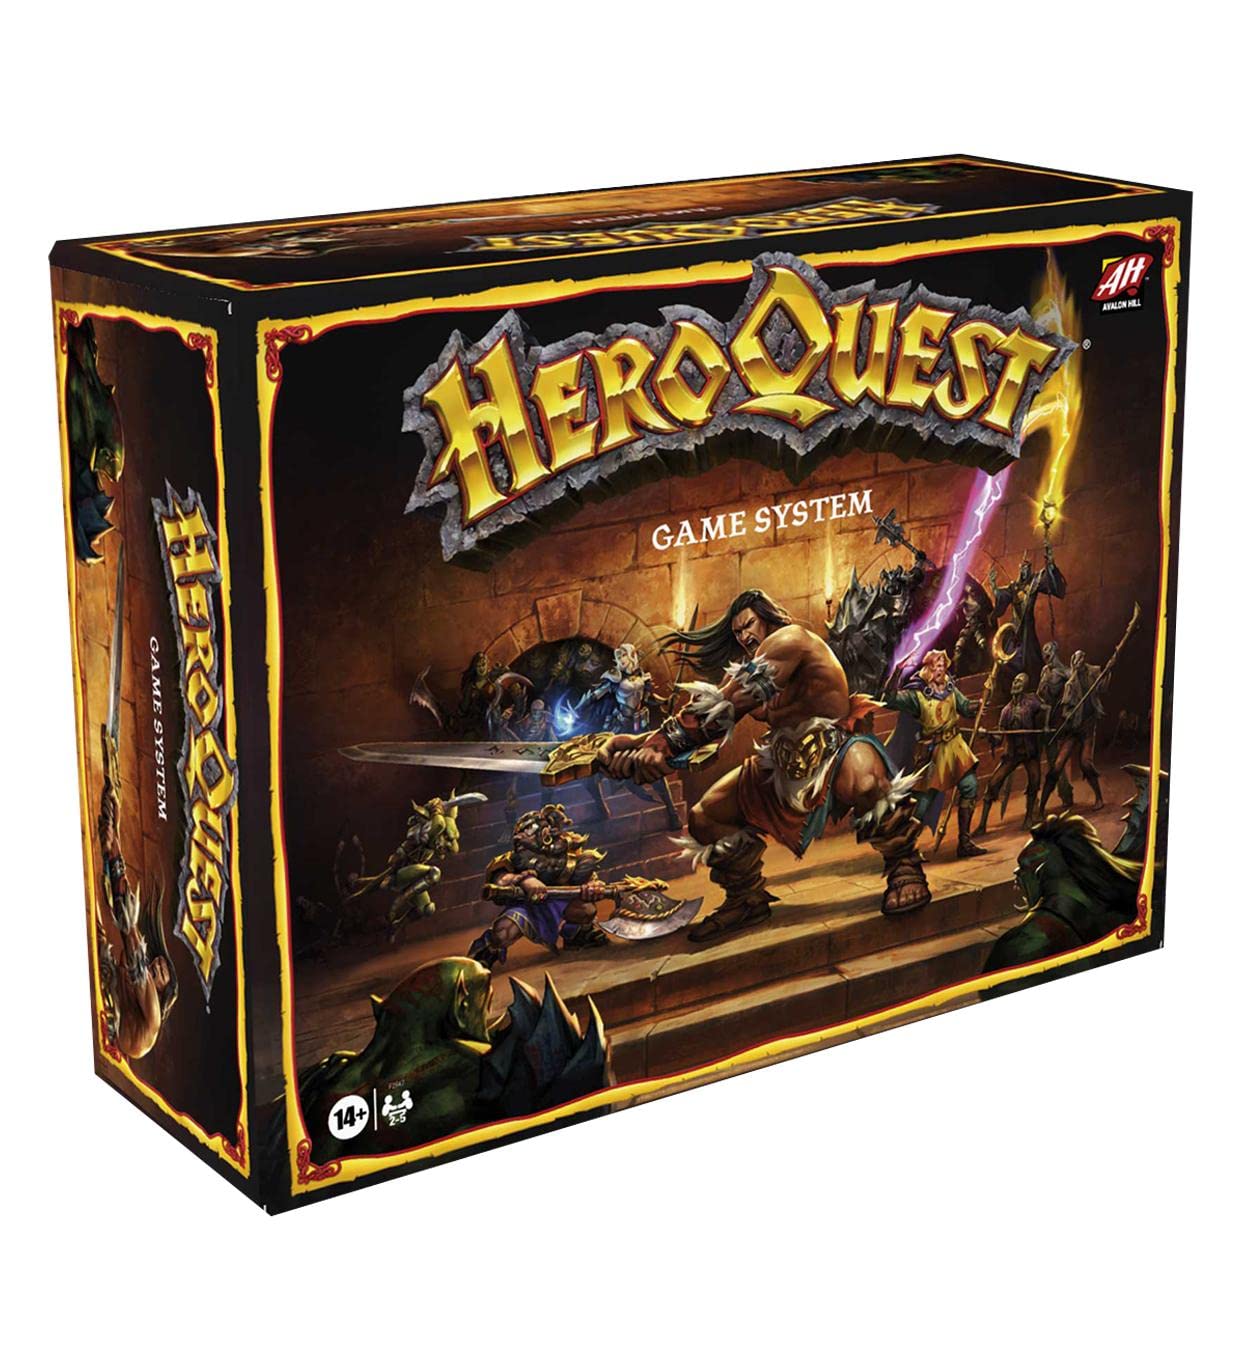 Hasbro Gaming Avalon Hill HeroQuest Game System Tabletop Board Game $47.48 + Free Shipping